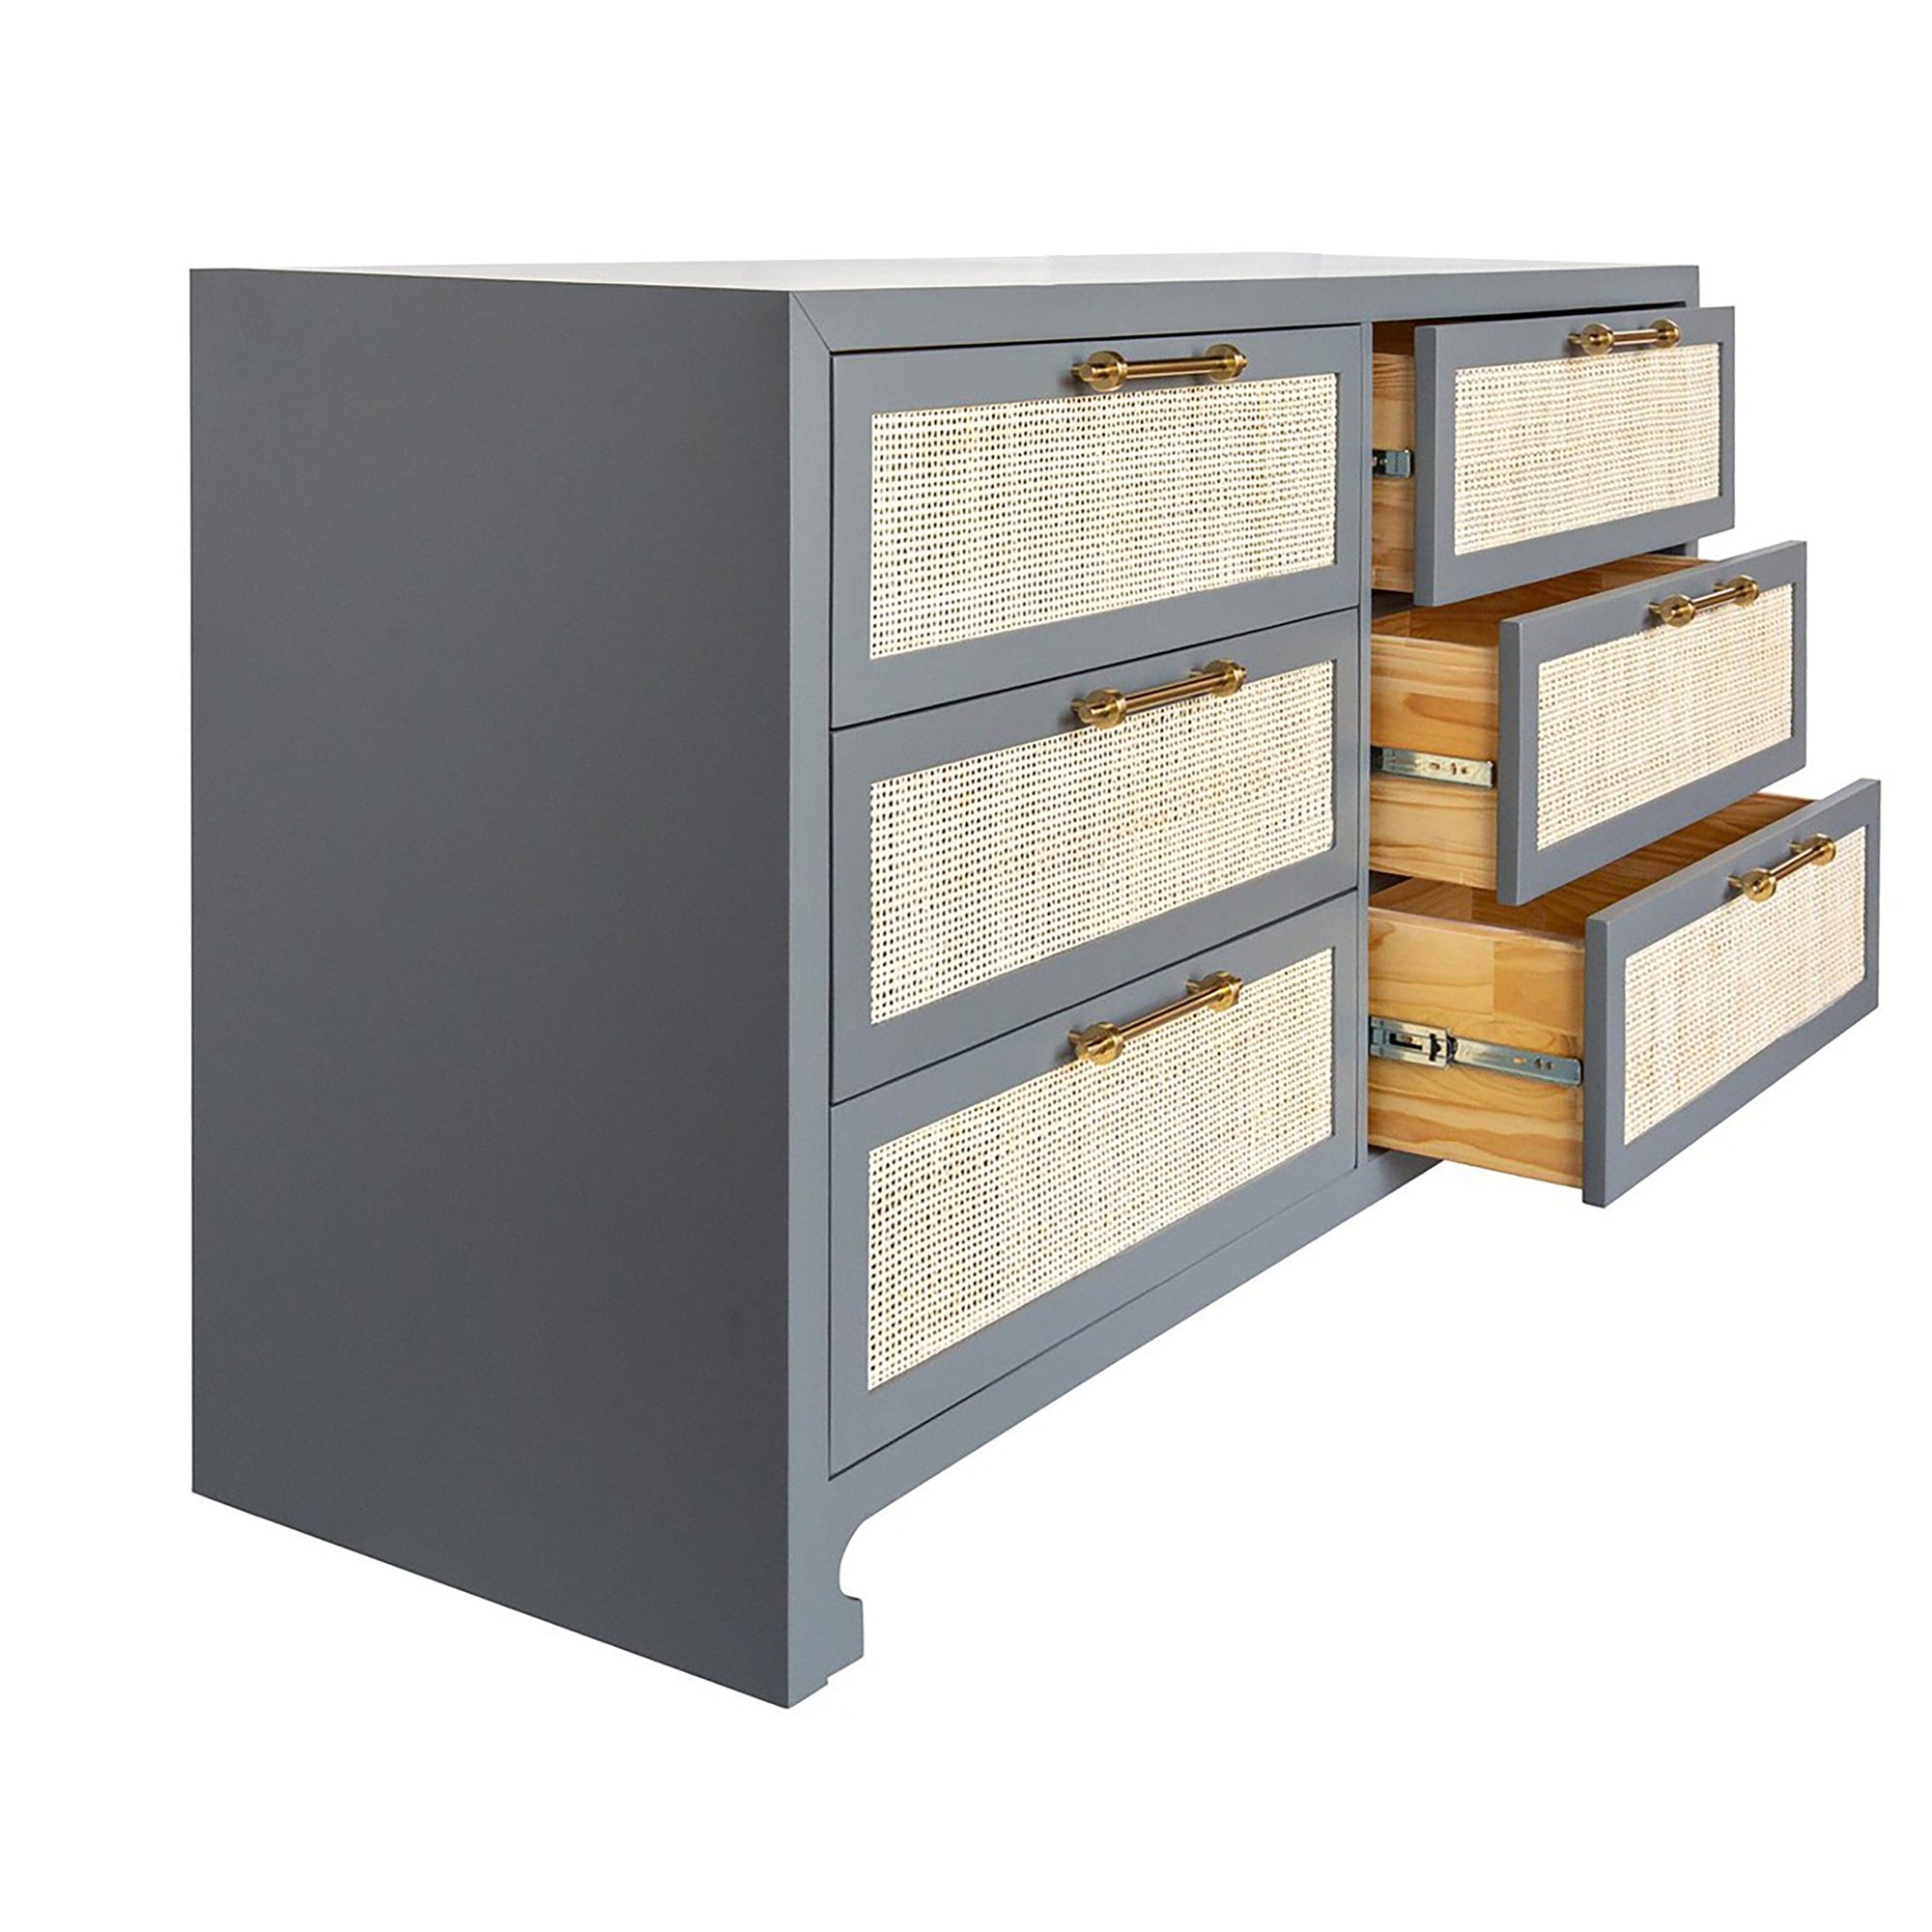 Chest - Carla Gray and Cane Dresser by Worlds Away - Angle View with open drawers shown